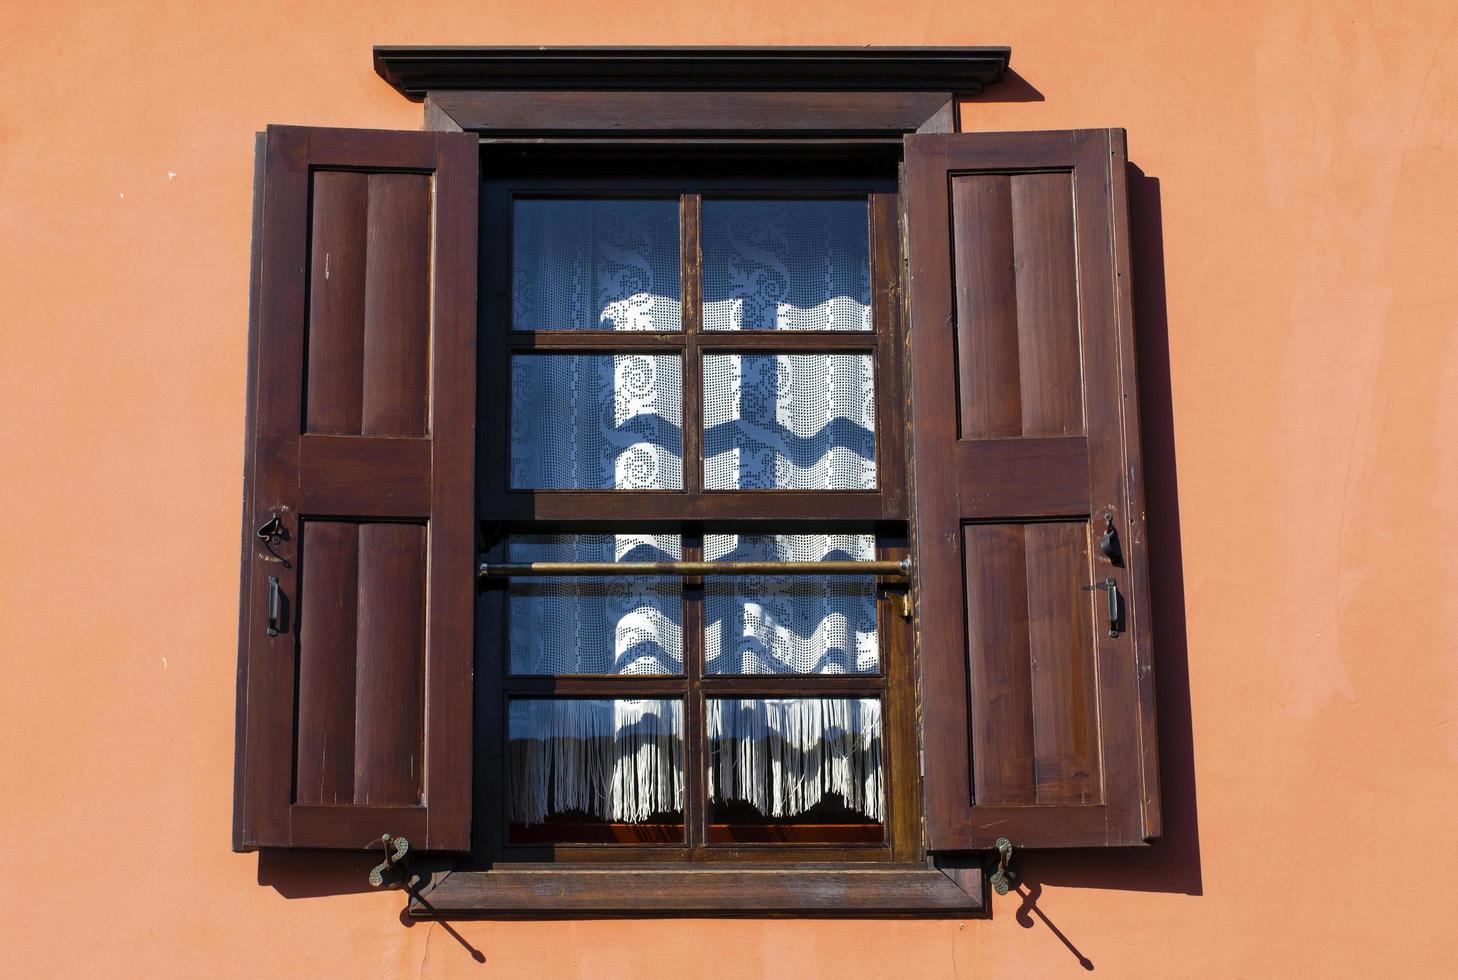 Abstract Ancient Building Houses Windows photo